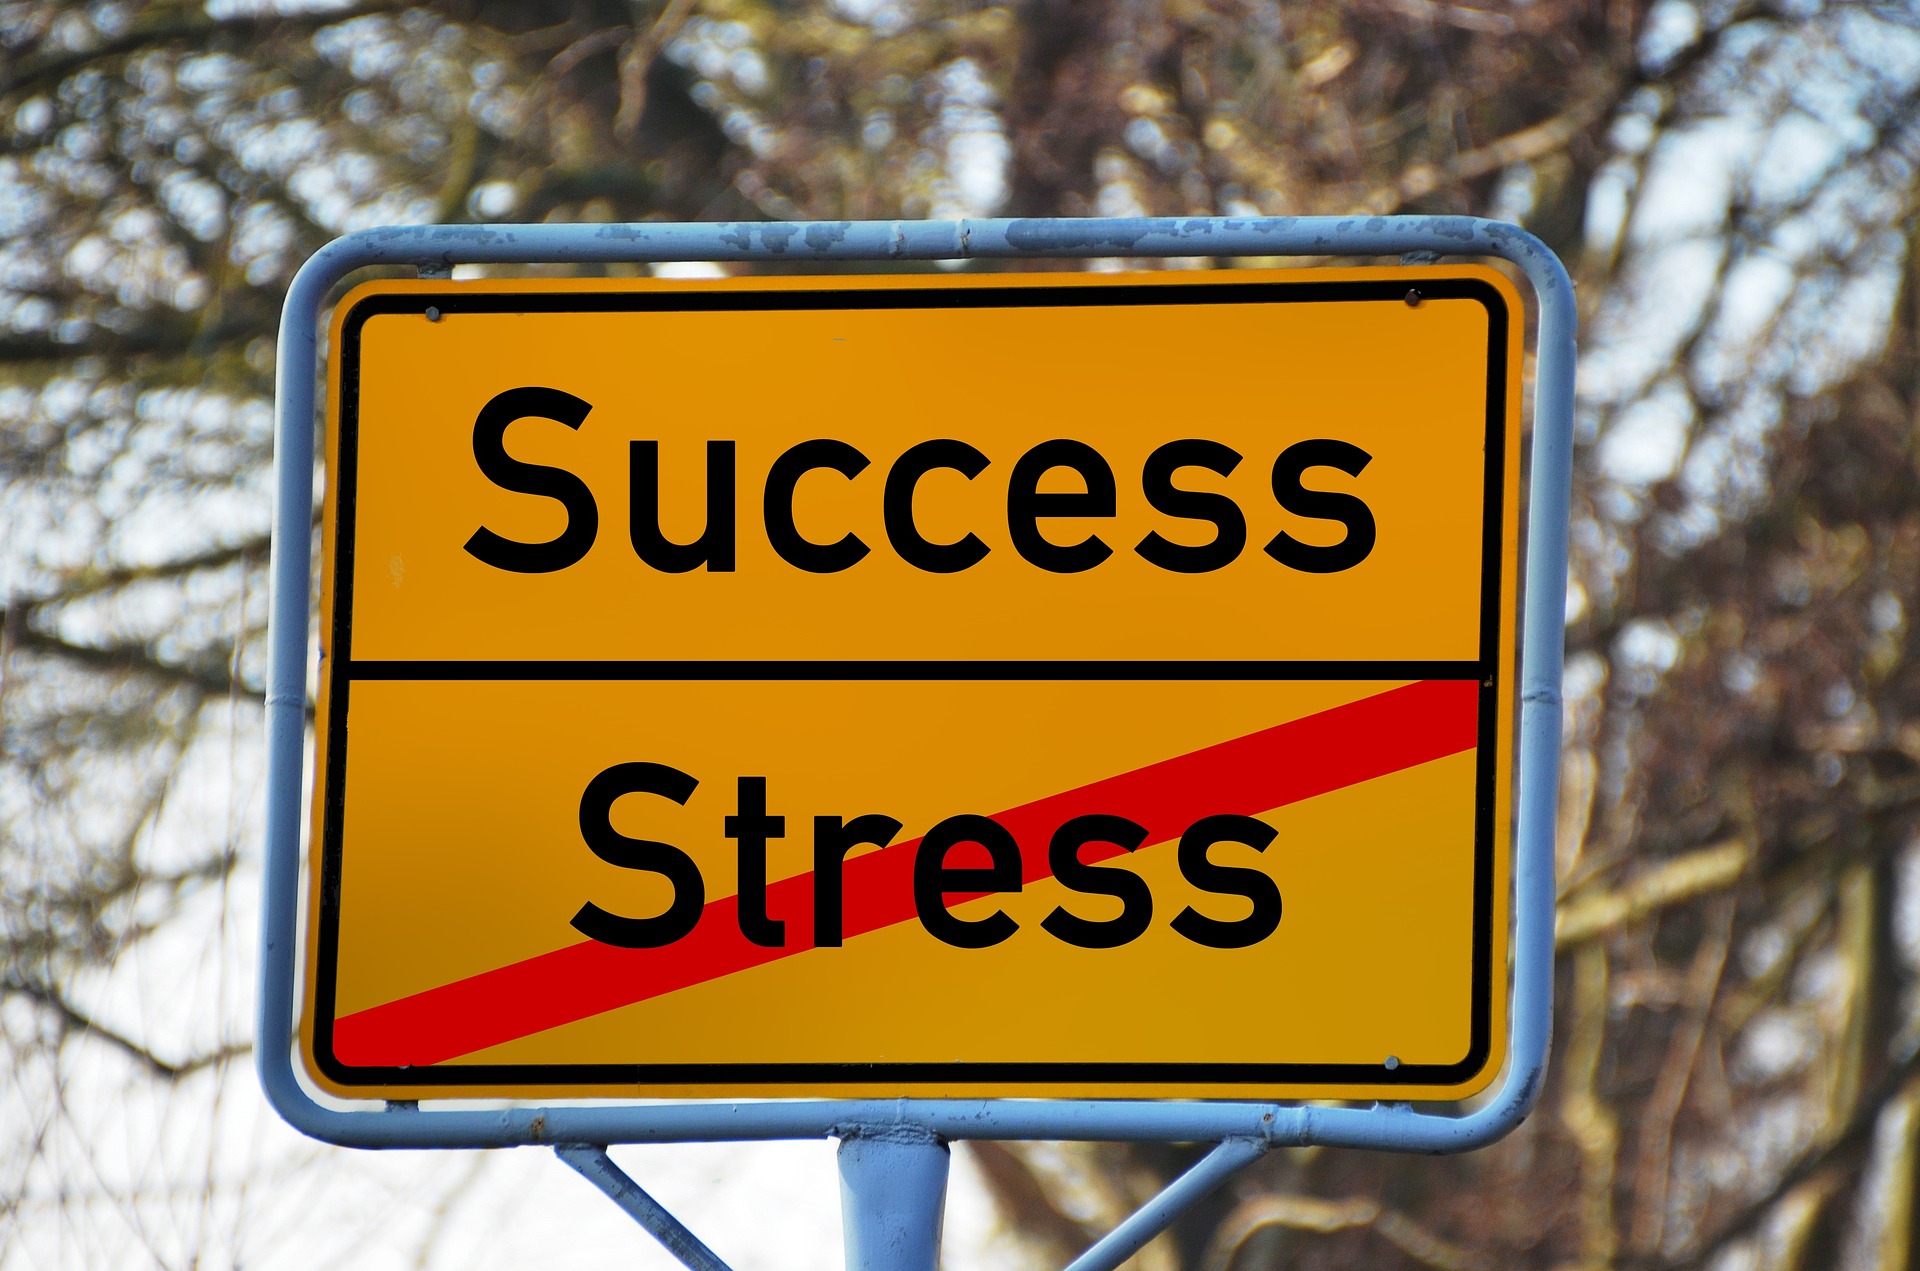 Get rid of stress and get success